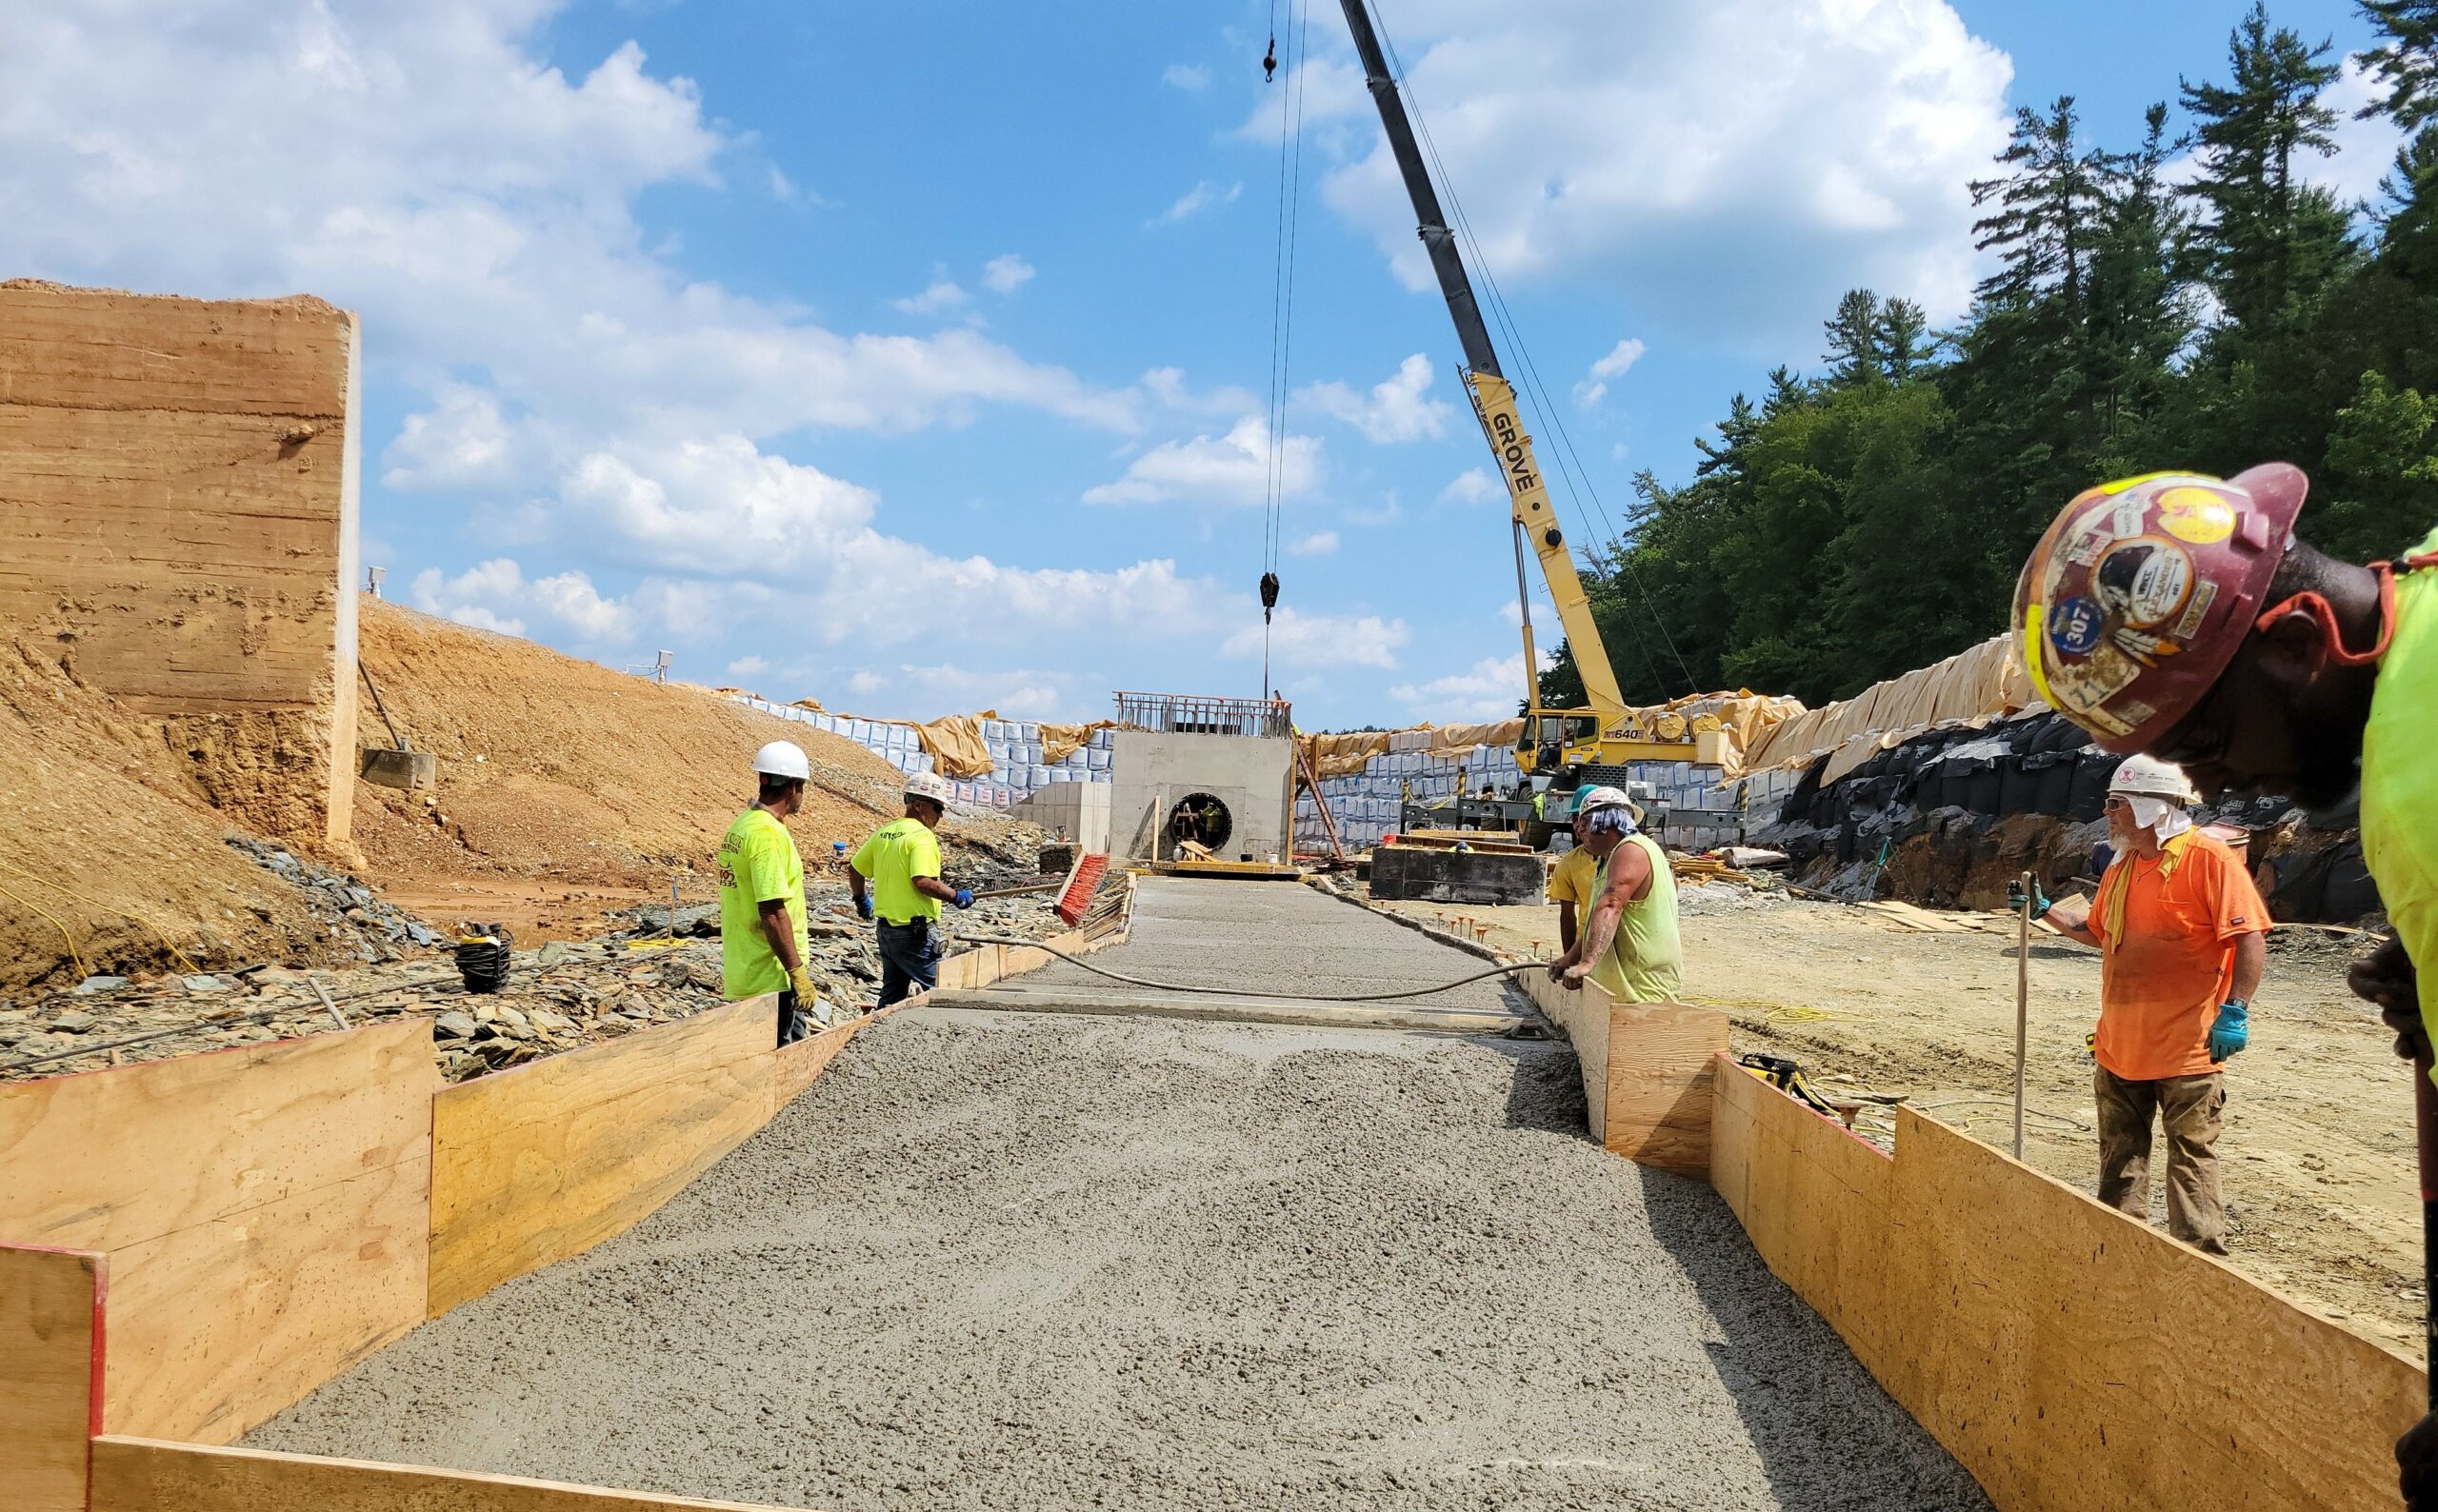 Fill material for the new 48” pipe that will be installed from the valve tower to the spillway is being placed.